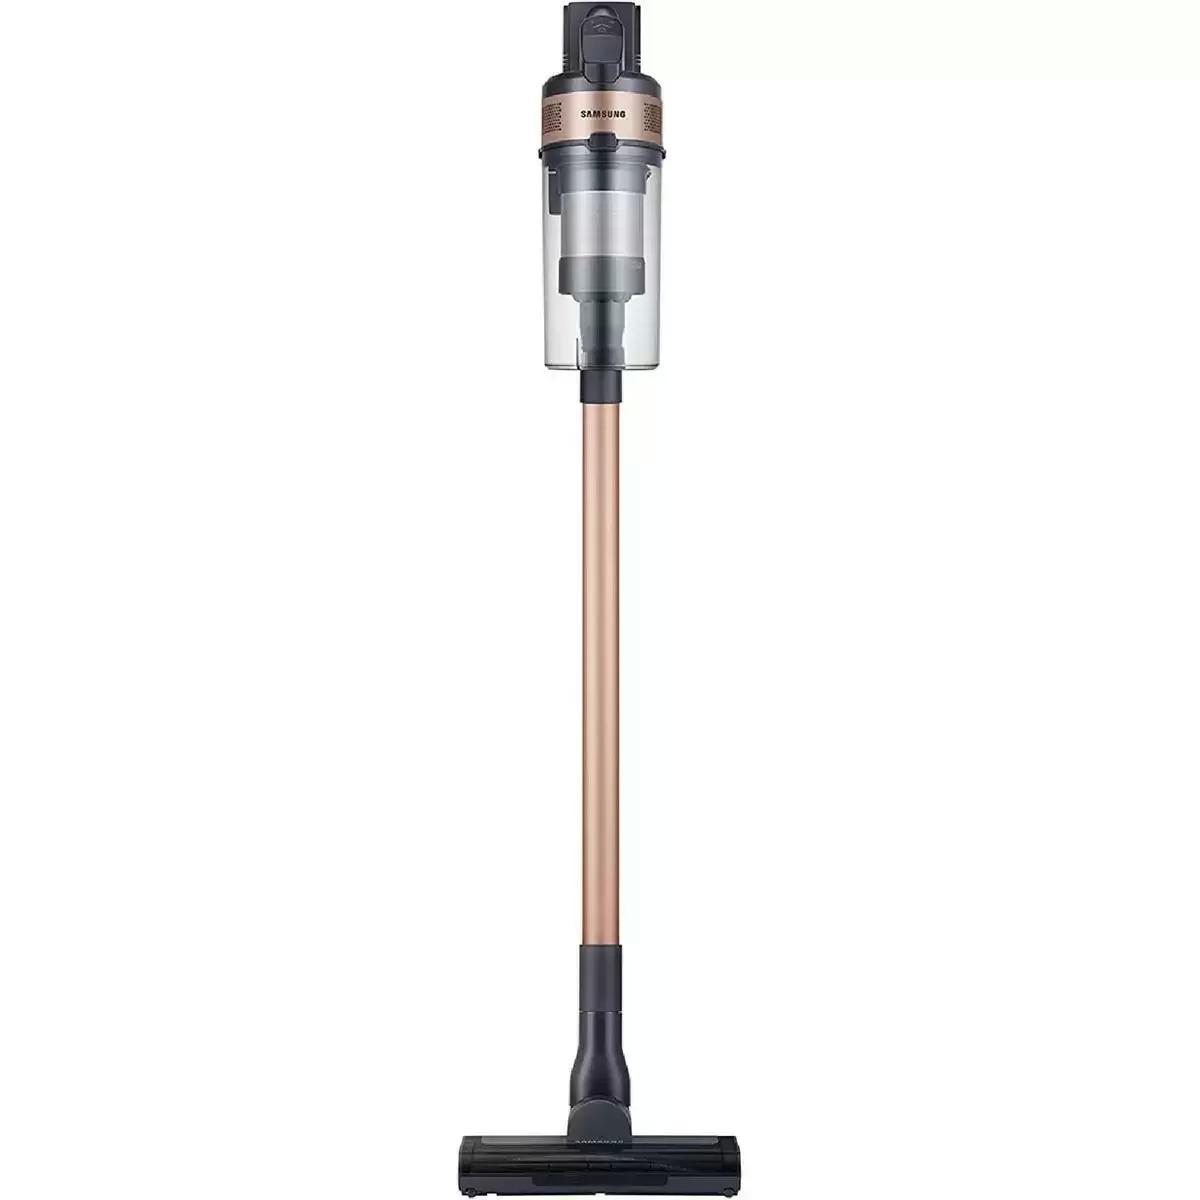 Samsung Jet 60 Flex Cordless Stick Vacuum Cleaner for $147 Shipped